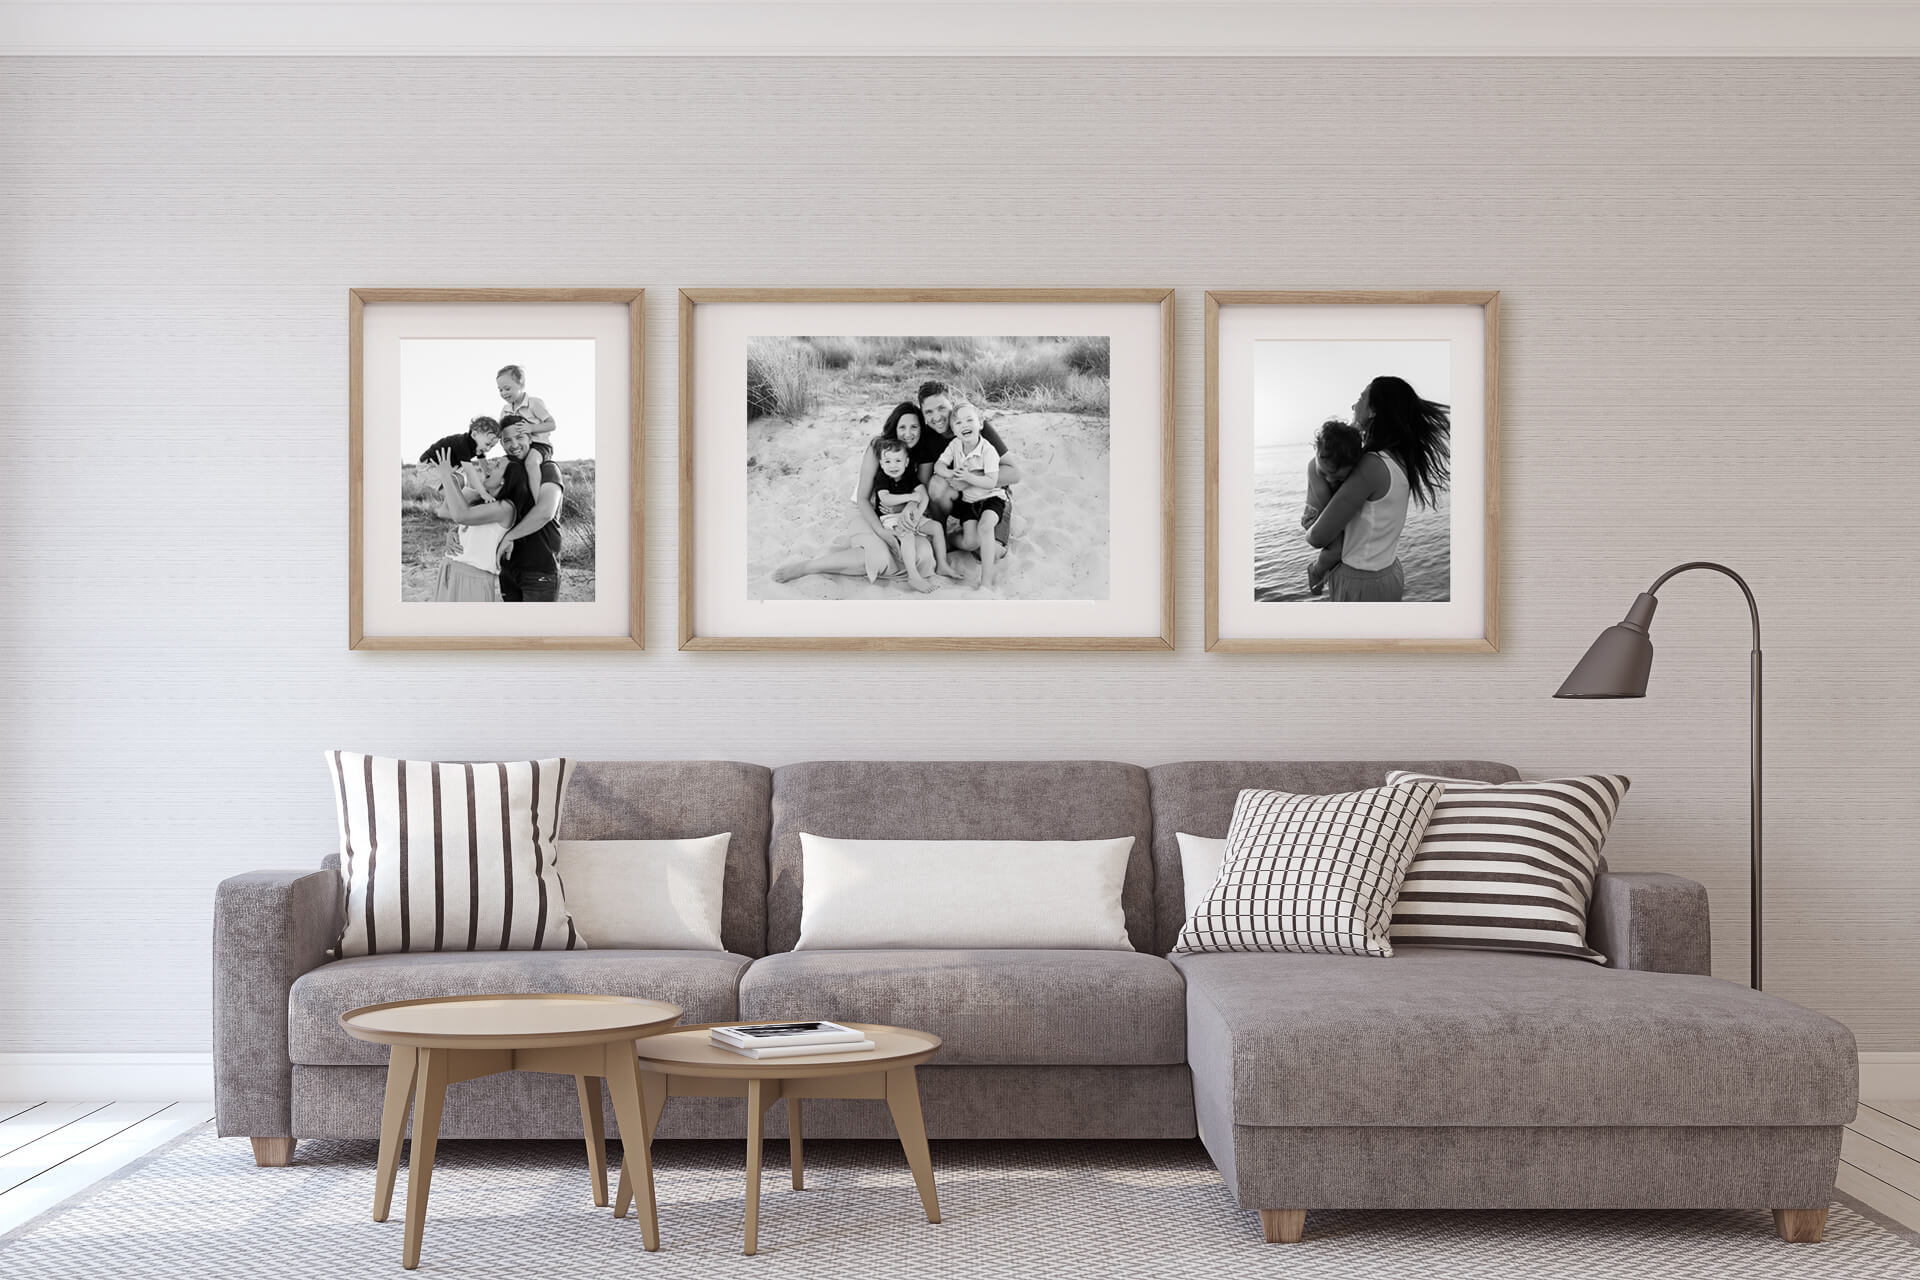 families photography wall art .Adelaide photographer